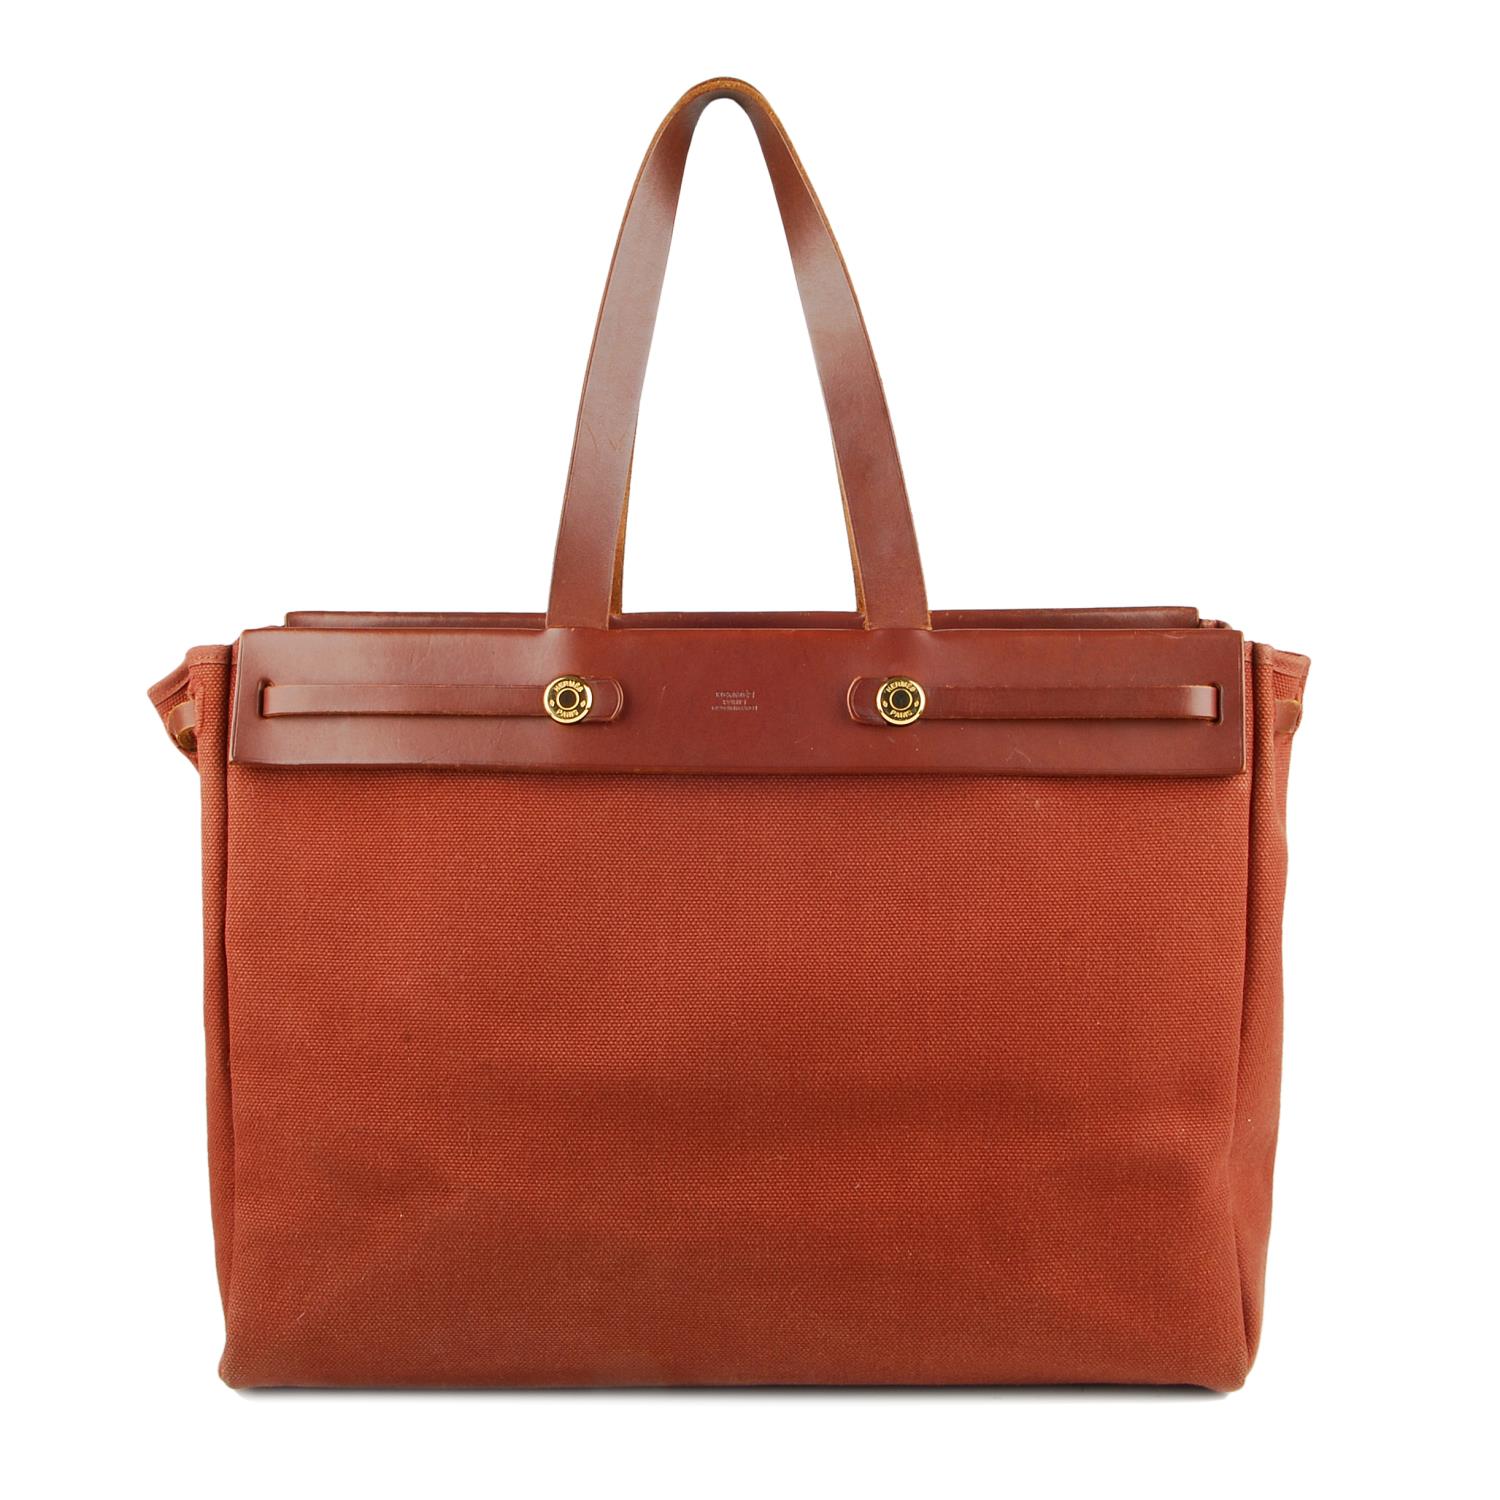 HERMÈS - a toile 2-in-1 Herbag Cabas MM handbag. A versatile bag, designed as two bags in one with